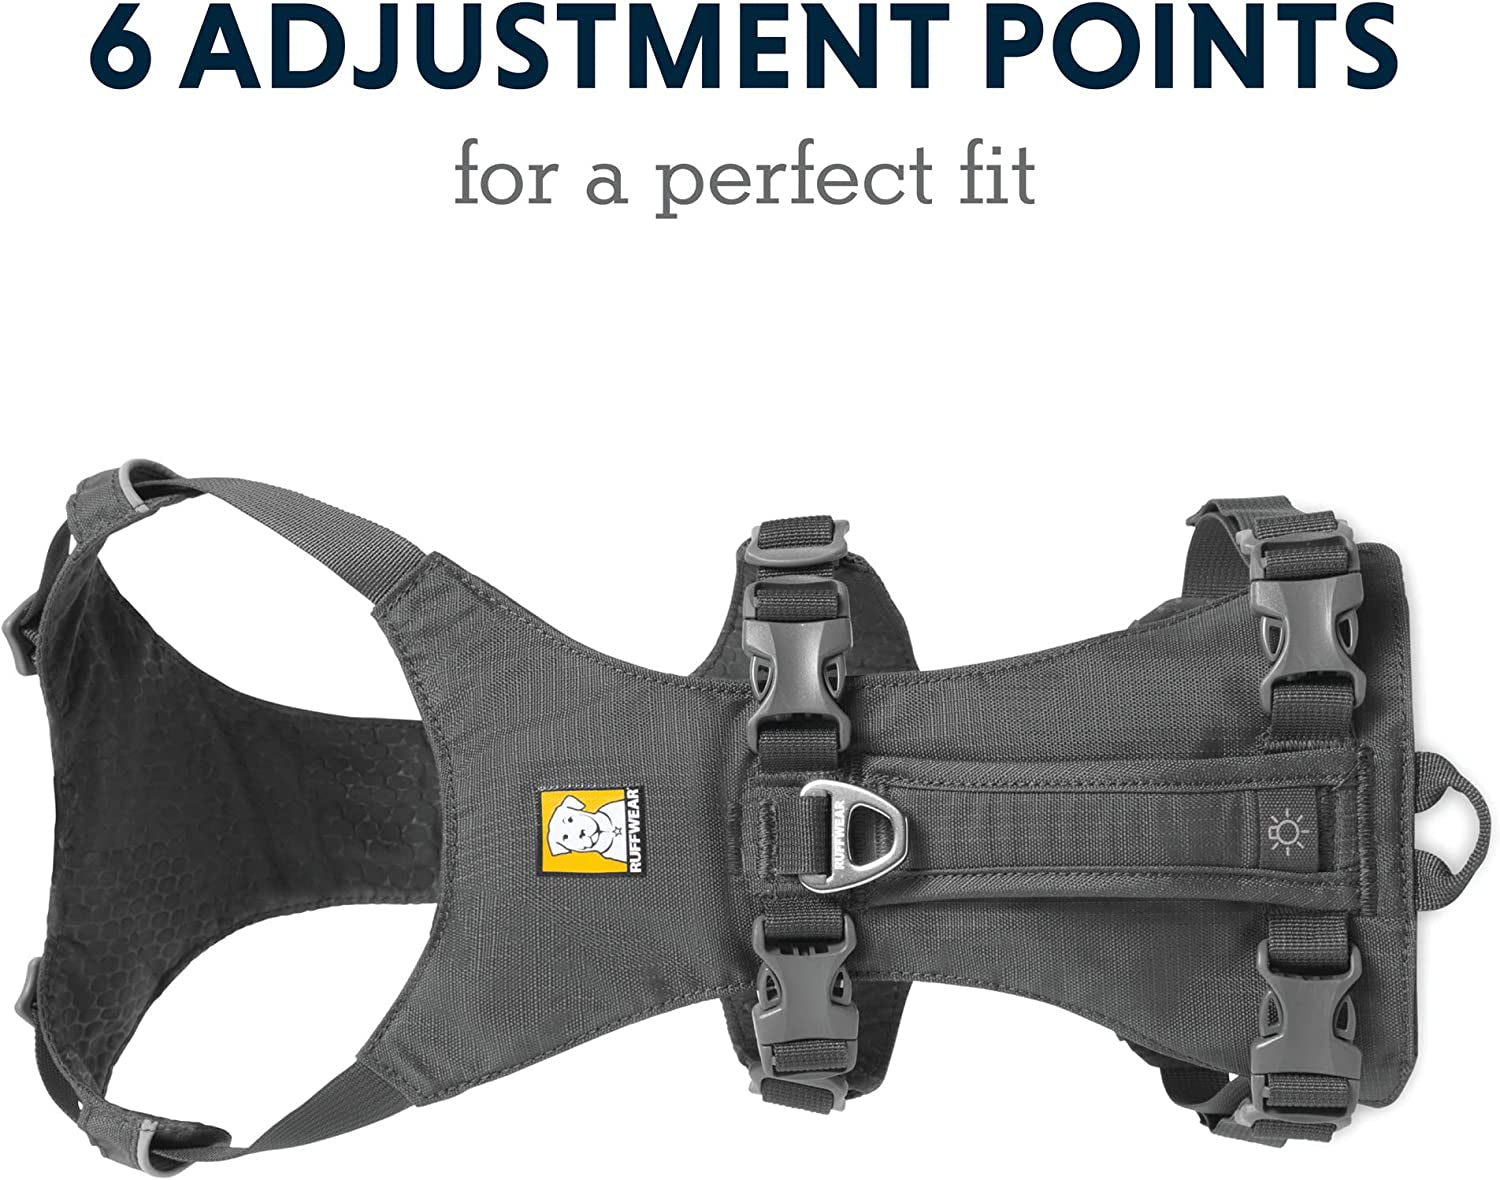 , Flagline Dog Harness, Lightweight Lift-And-Assist Harness with Padded Handle, Granite Gray, Large/X-Large